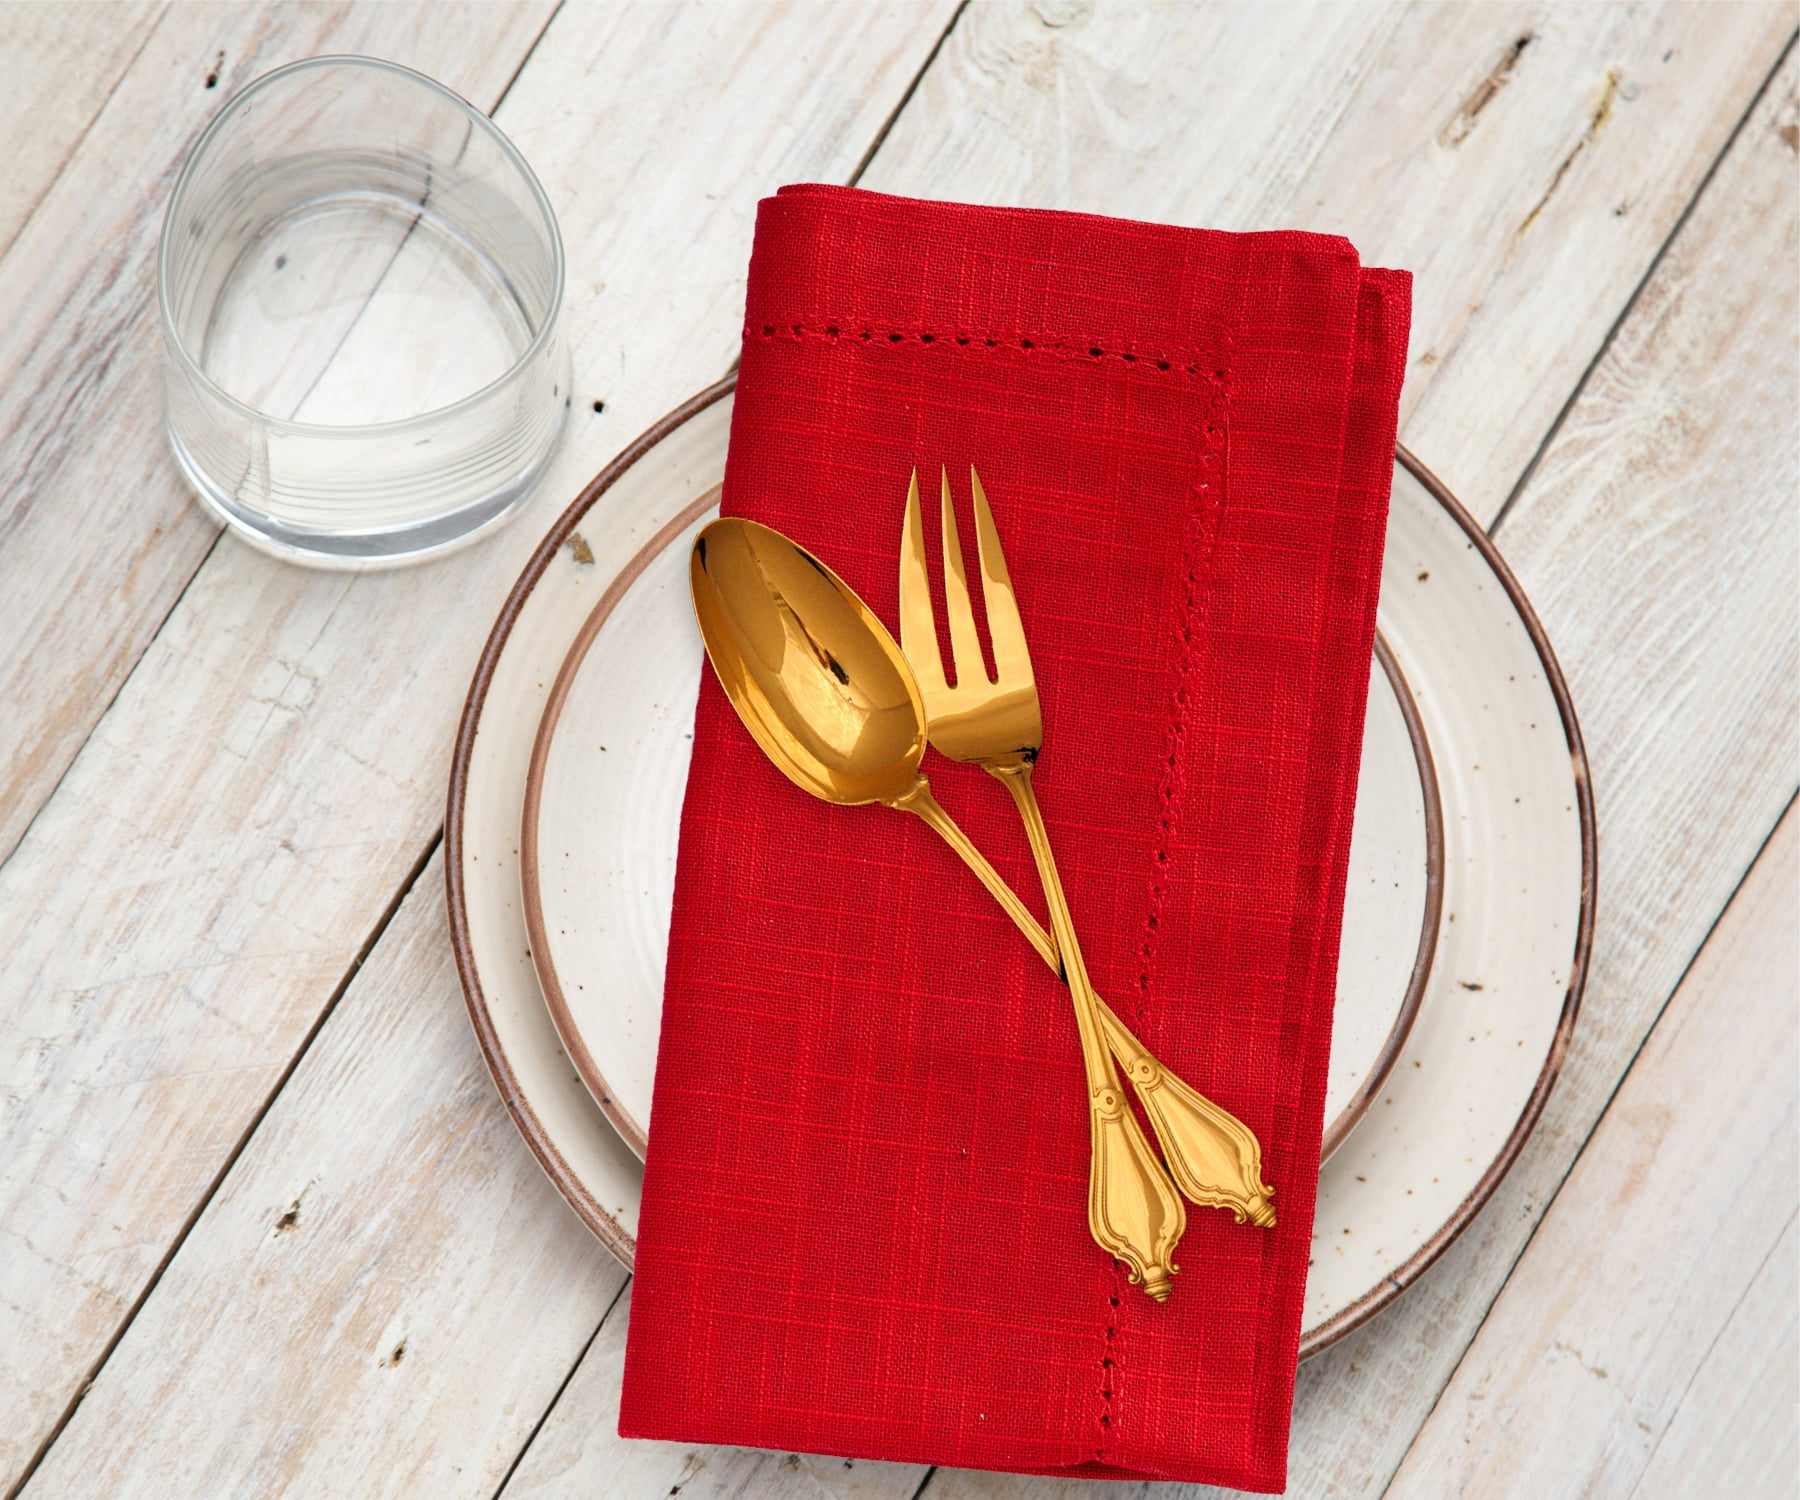 All Cotton and Linen Hemstitch Napkins - 18x18 Red, Set of 6 Red Cloth Napkins